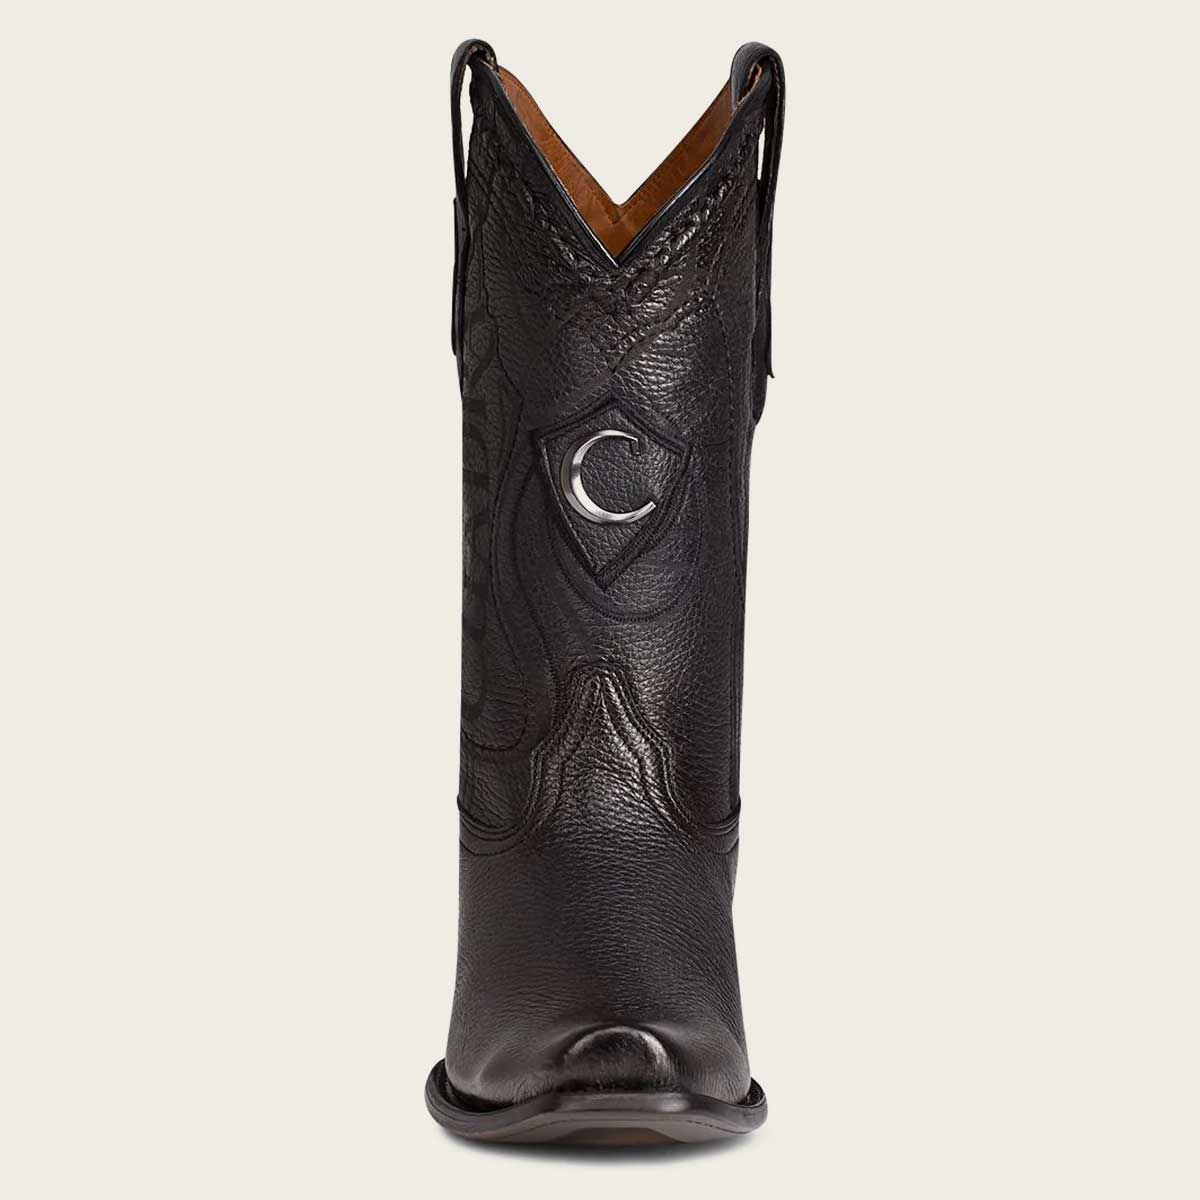 Stylish black leather boot with intricate engraving and a metallic monogram accent.